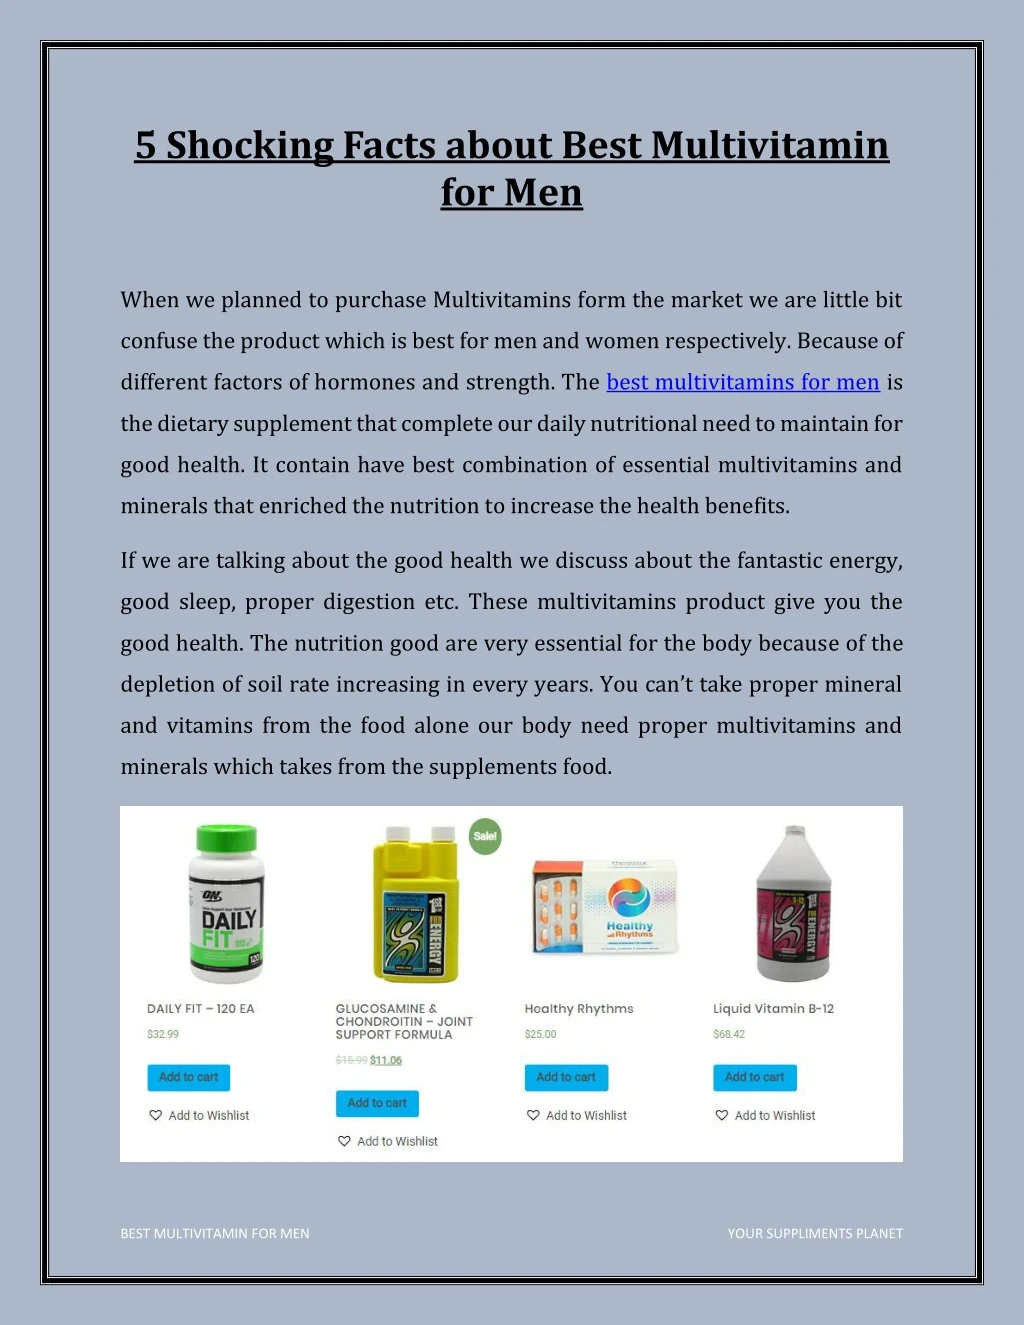 5 shocking facts about best multivitamin for men